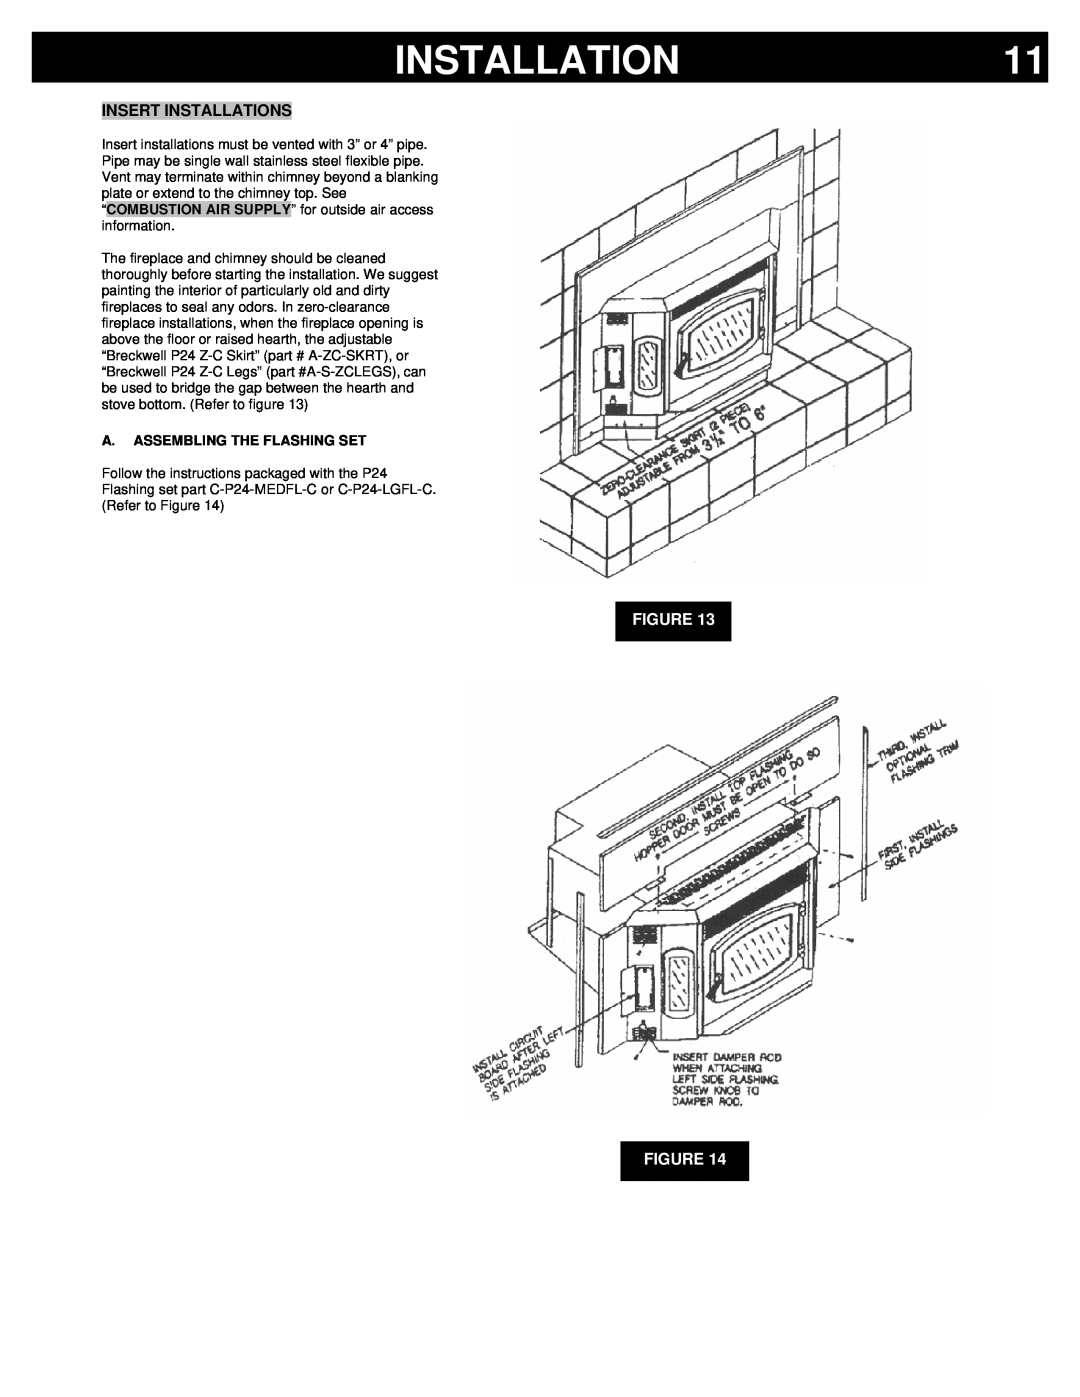 Breckwell P24FS, P24I owner manual Insert Installations, Figure Figure, A.Assembling The Flashing Set 